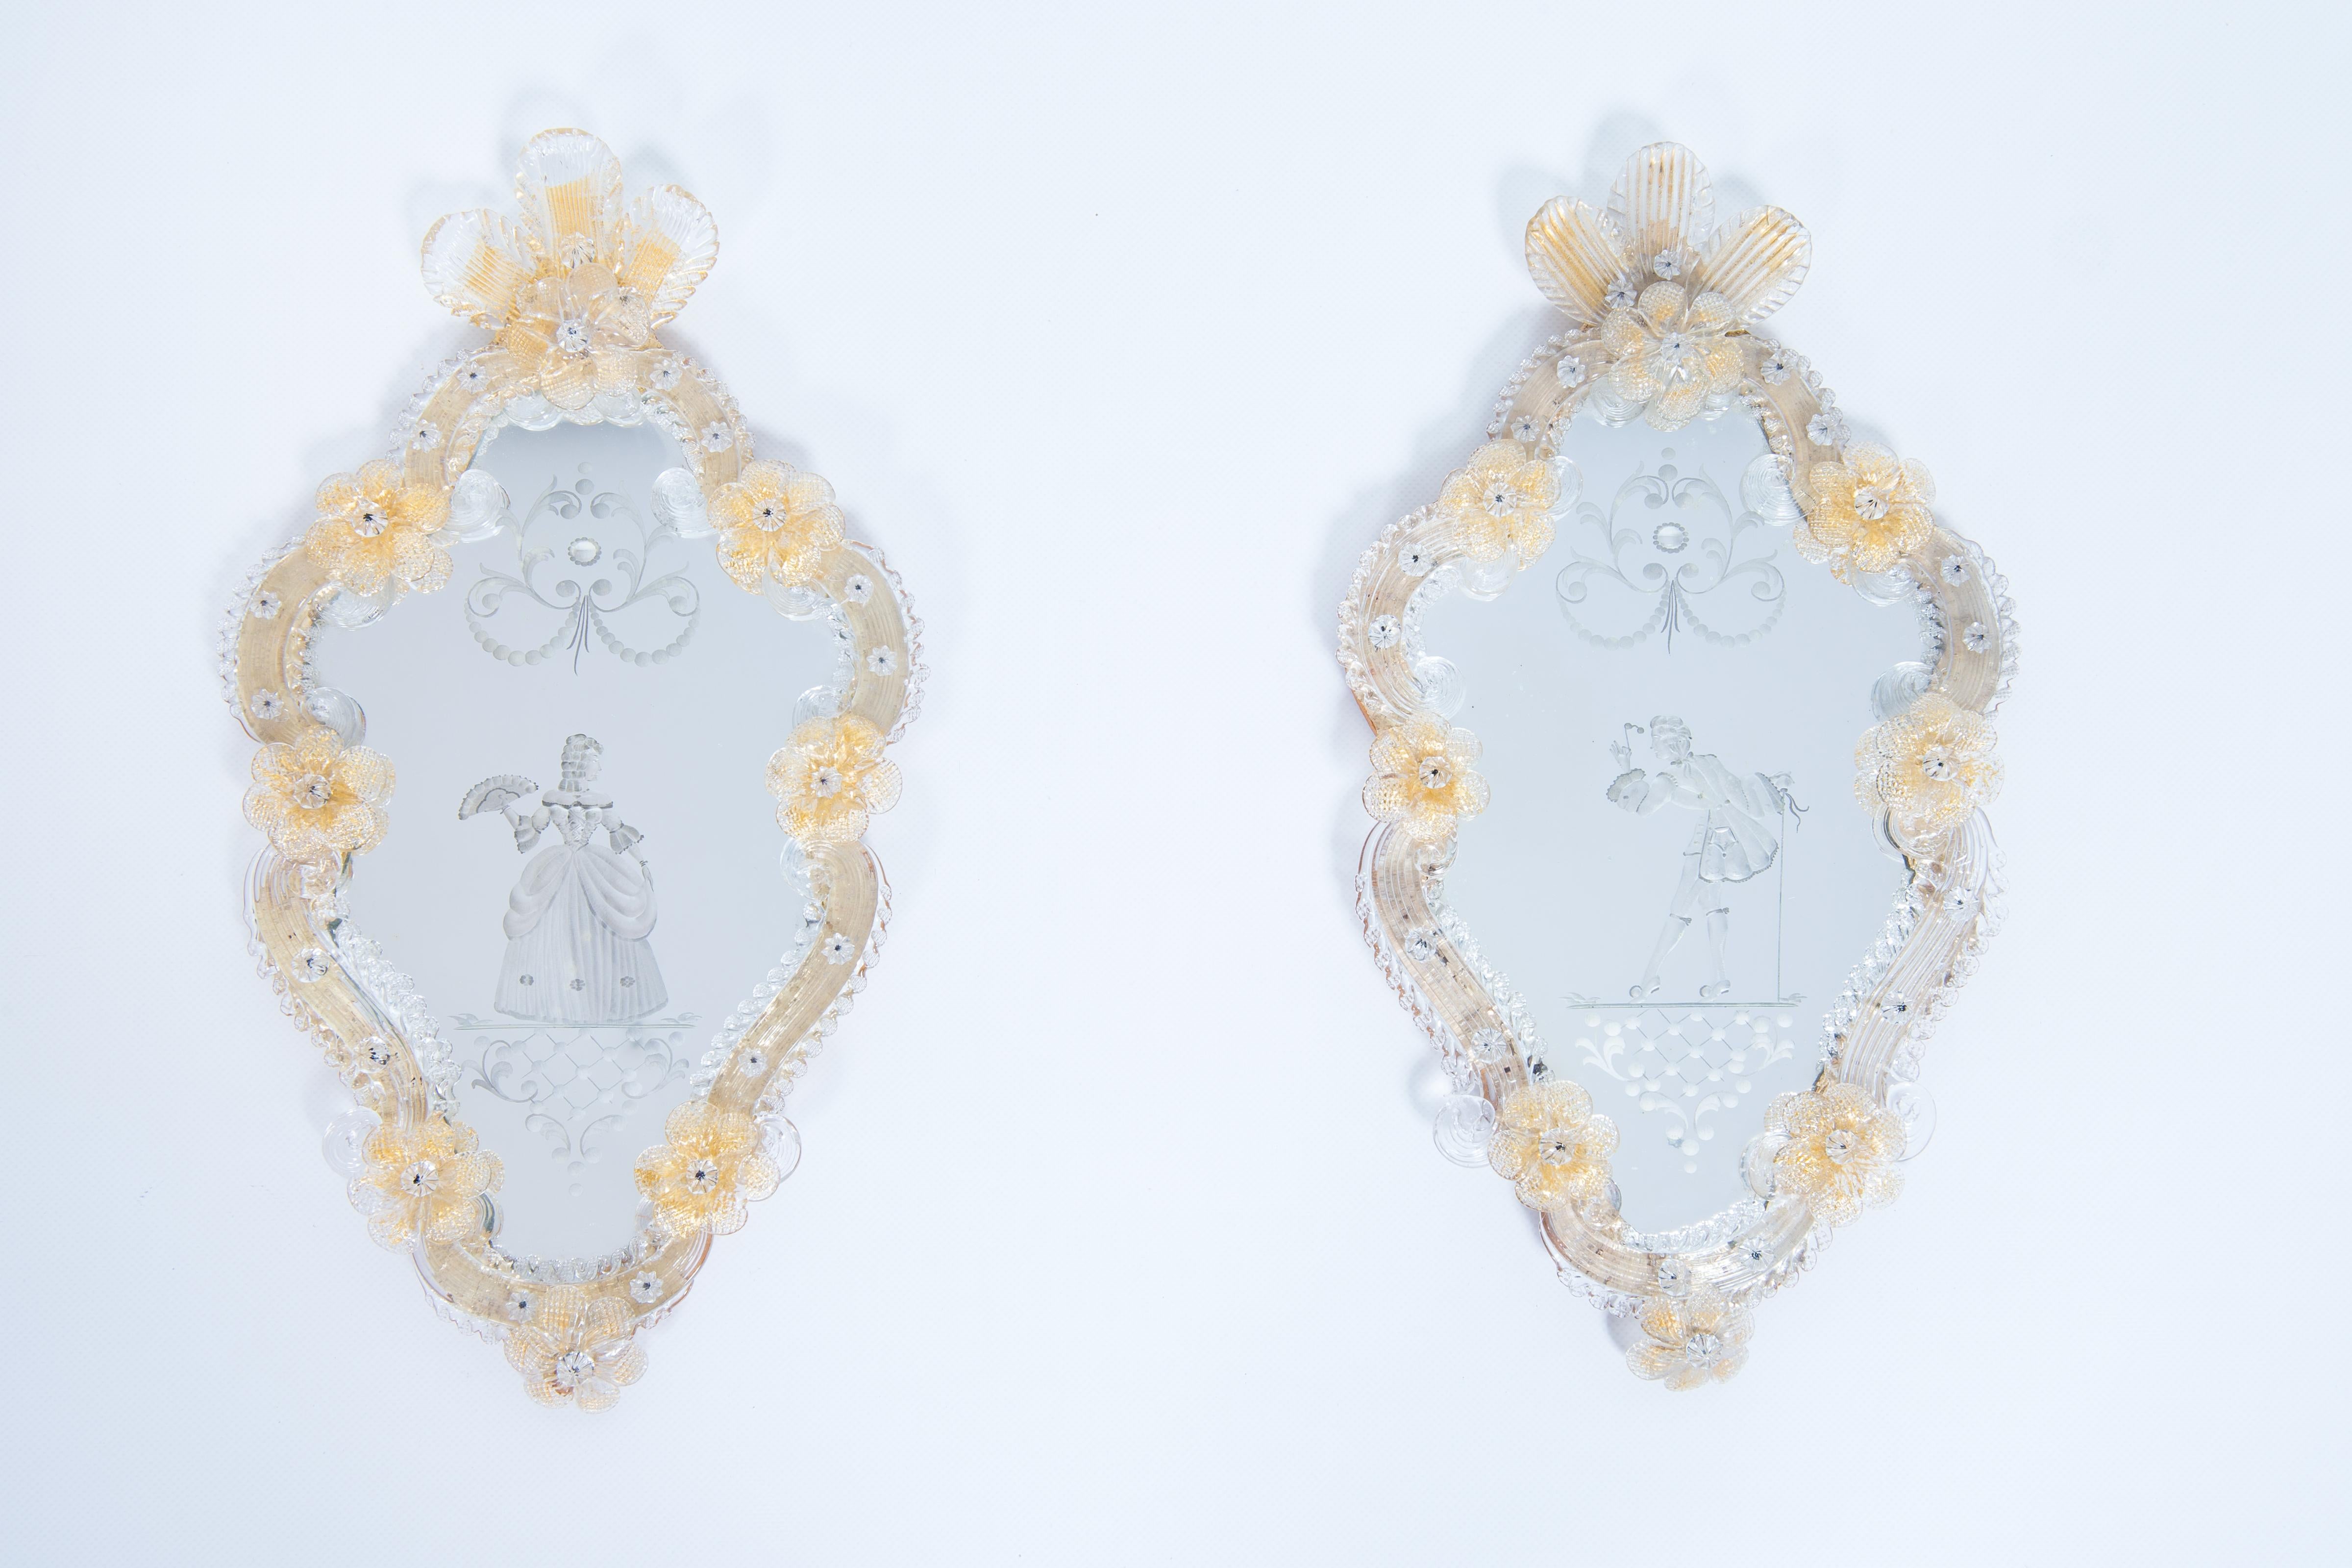 Venetian Sir & Lady Pair of engraved Murano Glass Mirrors Gold Finishes 1900s

This pair of Murano glass mirrors, entirely handcrafted by Venetian master glassmakers in the 1900s, is a fine piece of furniture inspired by the elegance and